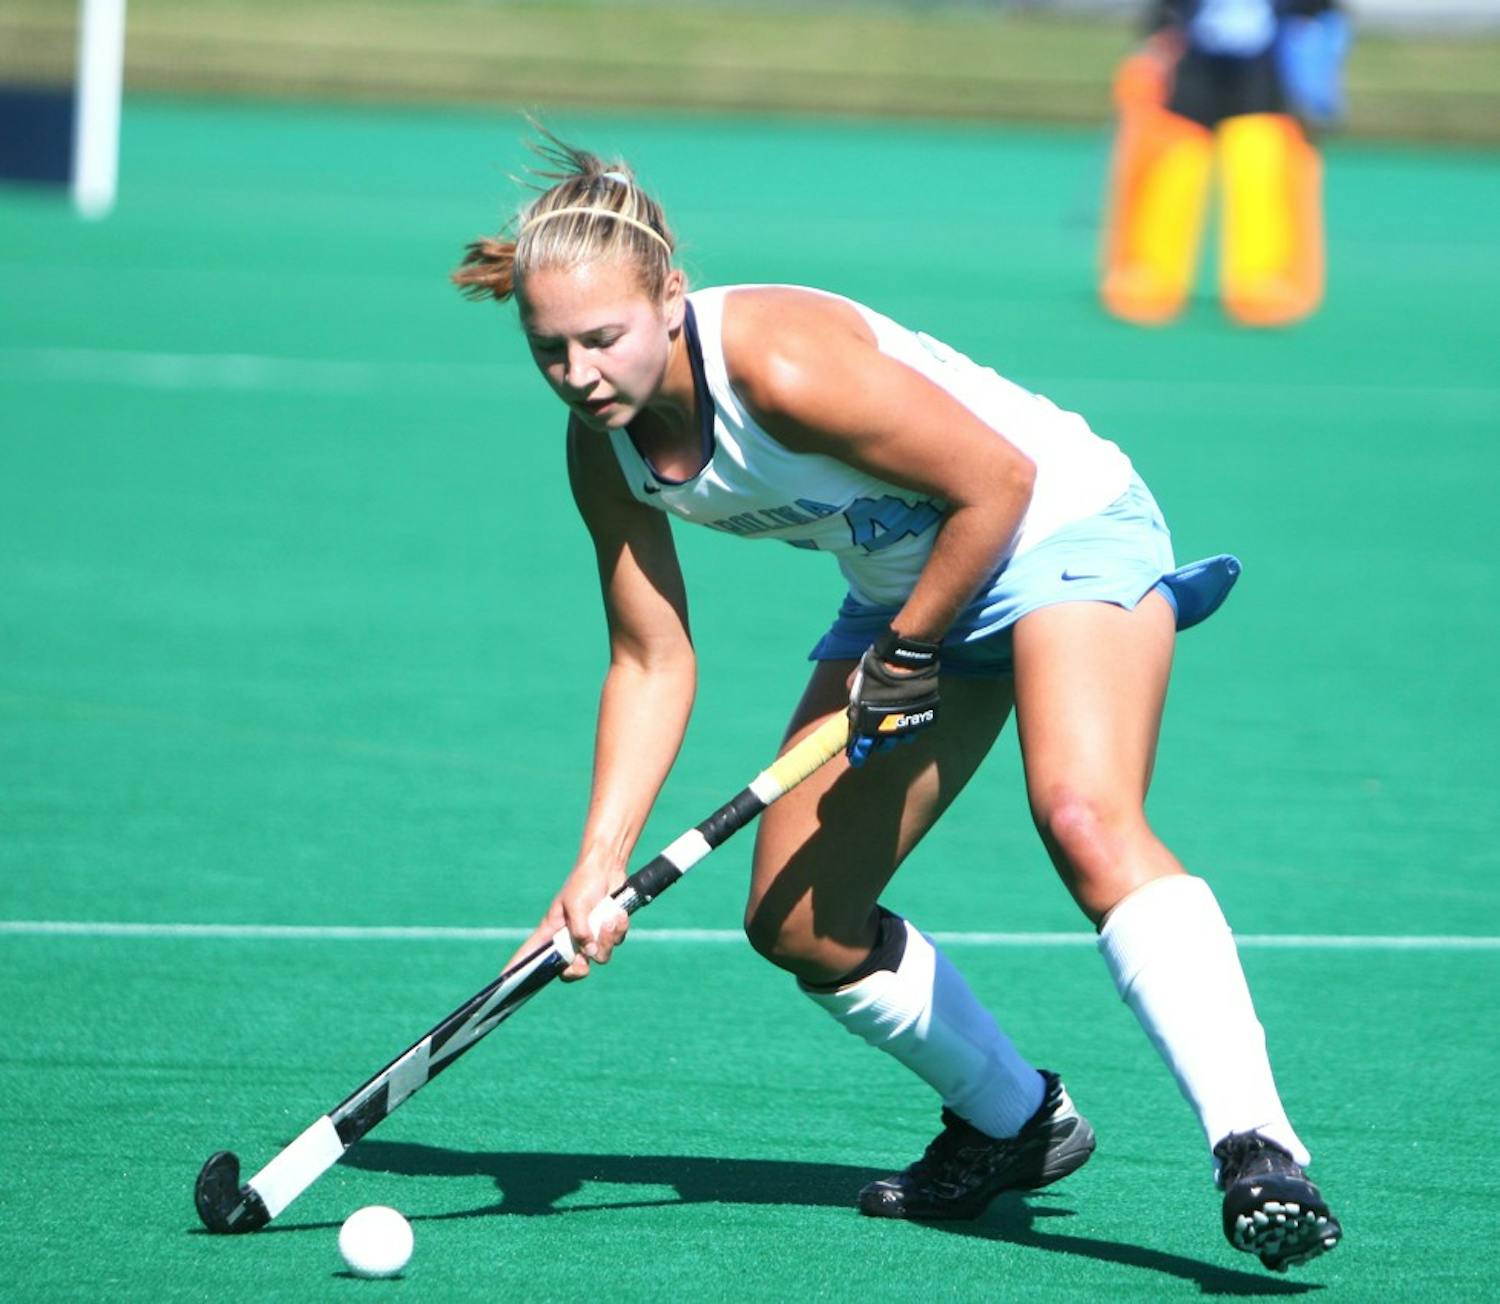 Sophomore Kelsey Kolojejchick has played in back-to-back national title games for North Carolina. She led the Tar Heels this year with 15 goals.